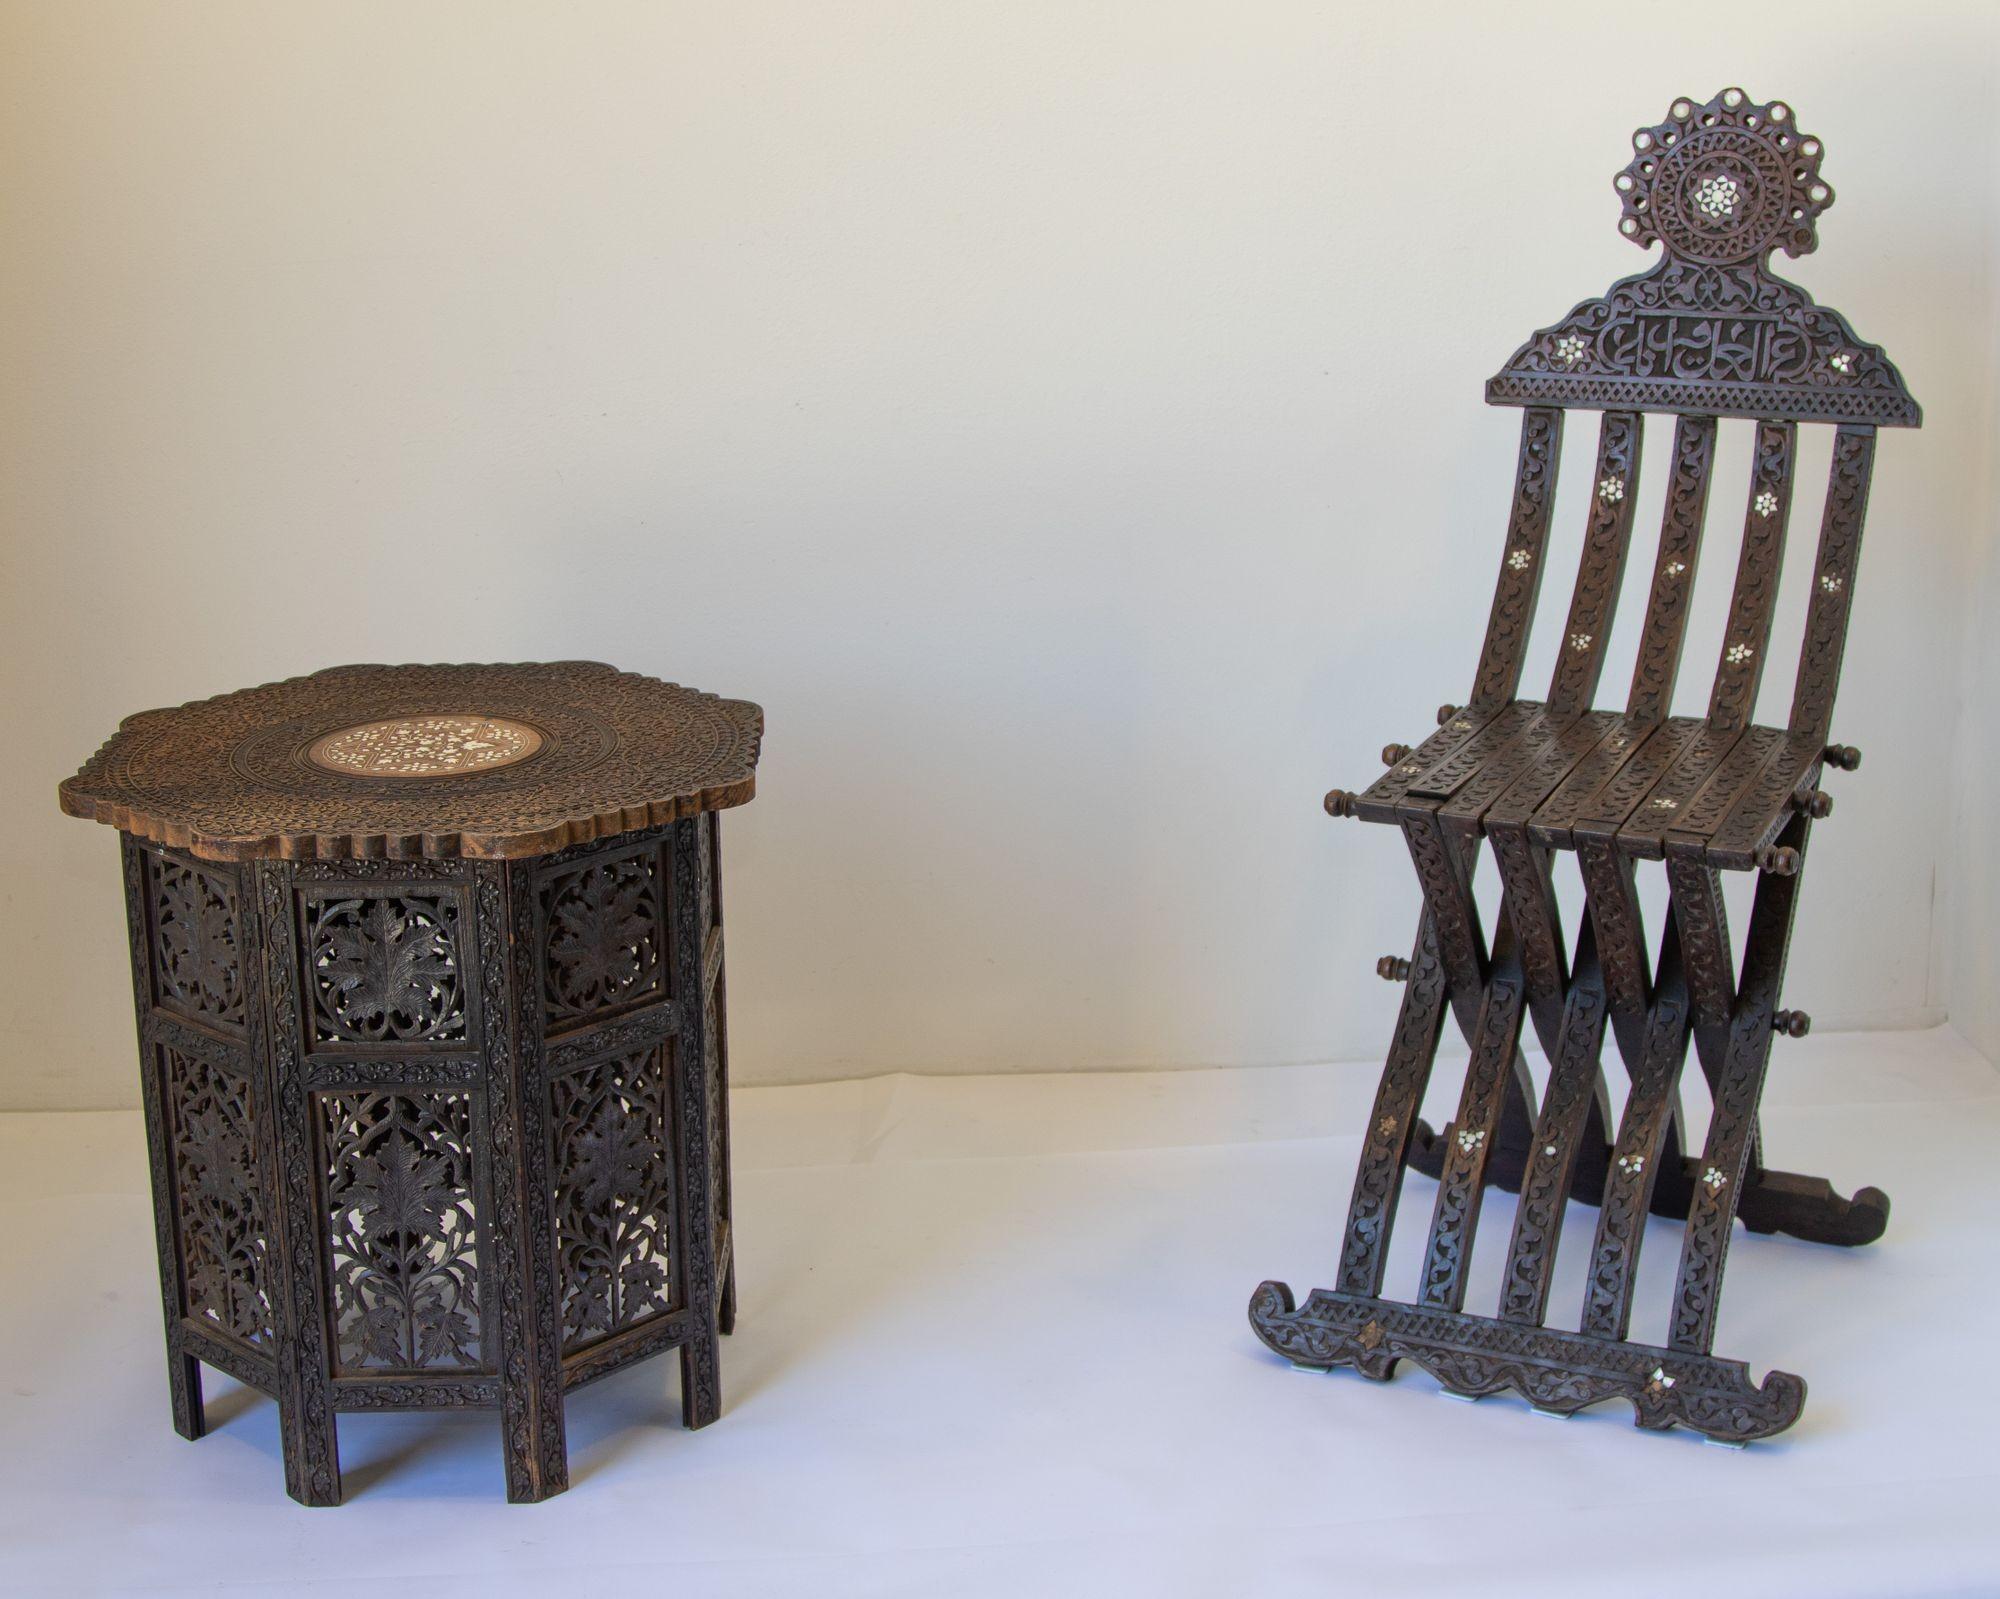 19th Century intricately carved Anglo-Indian octagonal scalloped edge side table.
A beautiful finely carved British Colonial wooden occasional side table from India.
Antique fine quality pierced and profusely carved Anglo-Indian occasional table